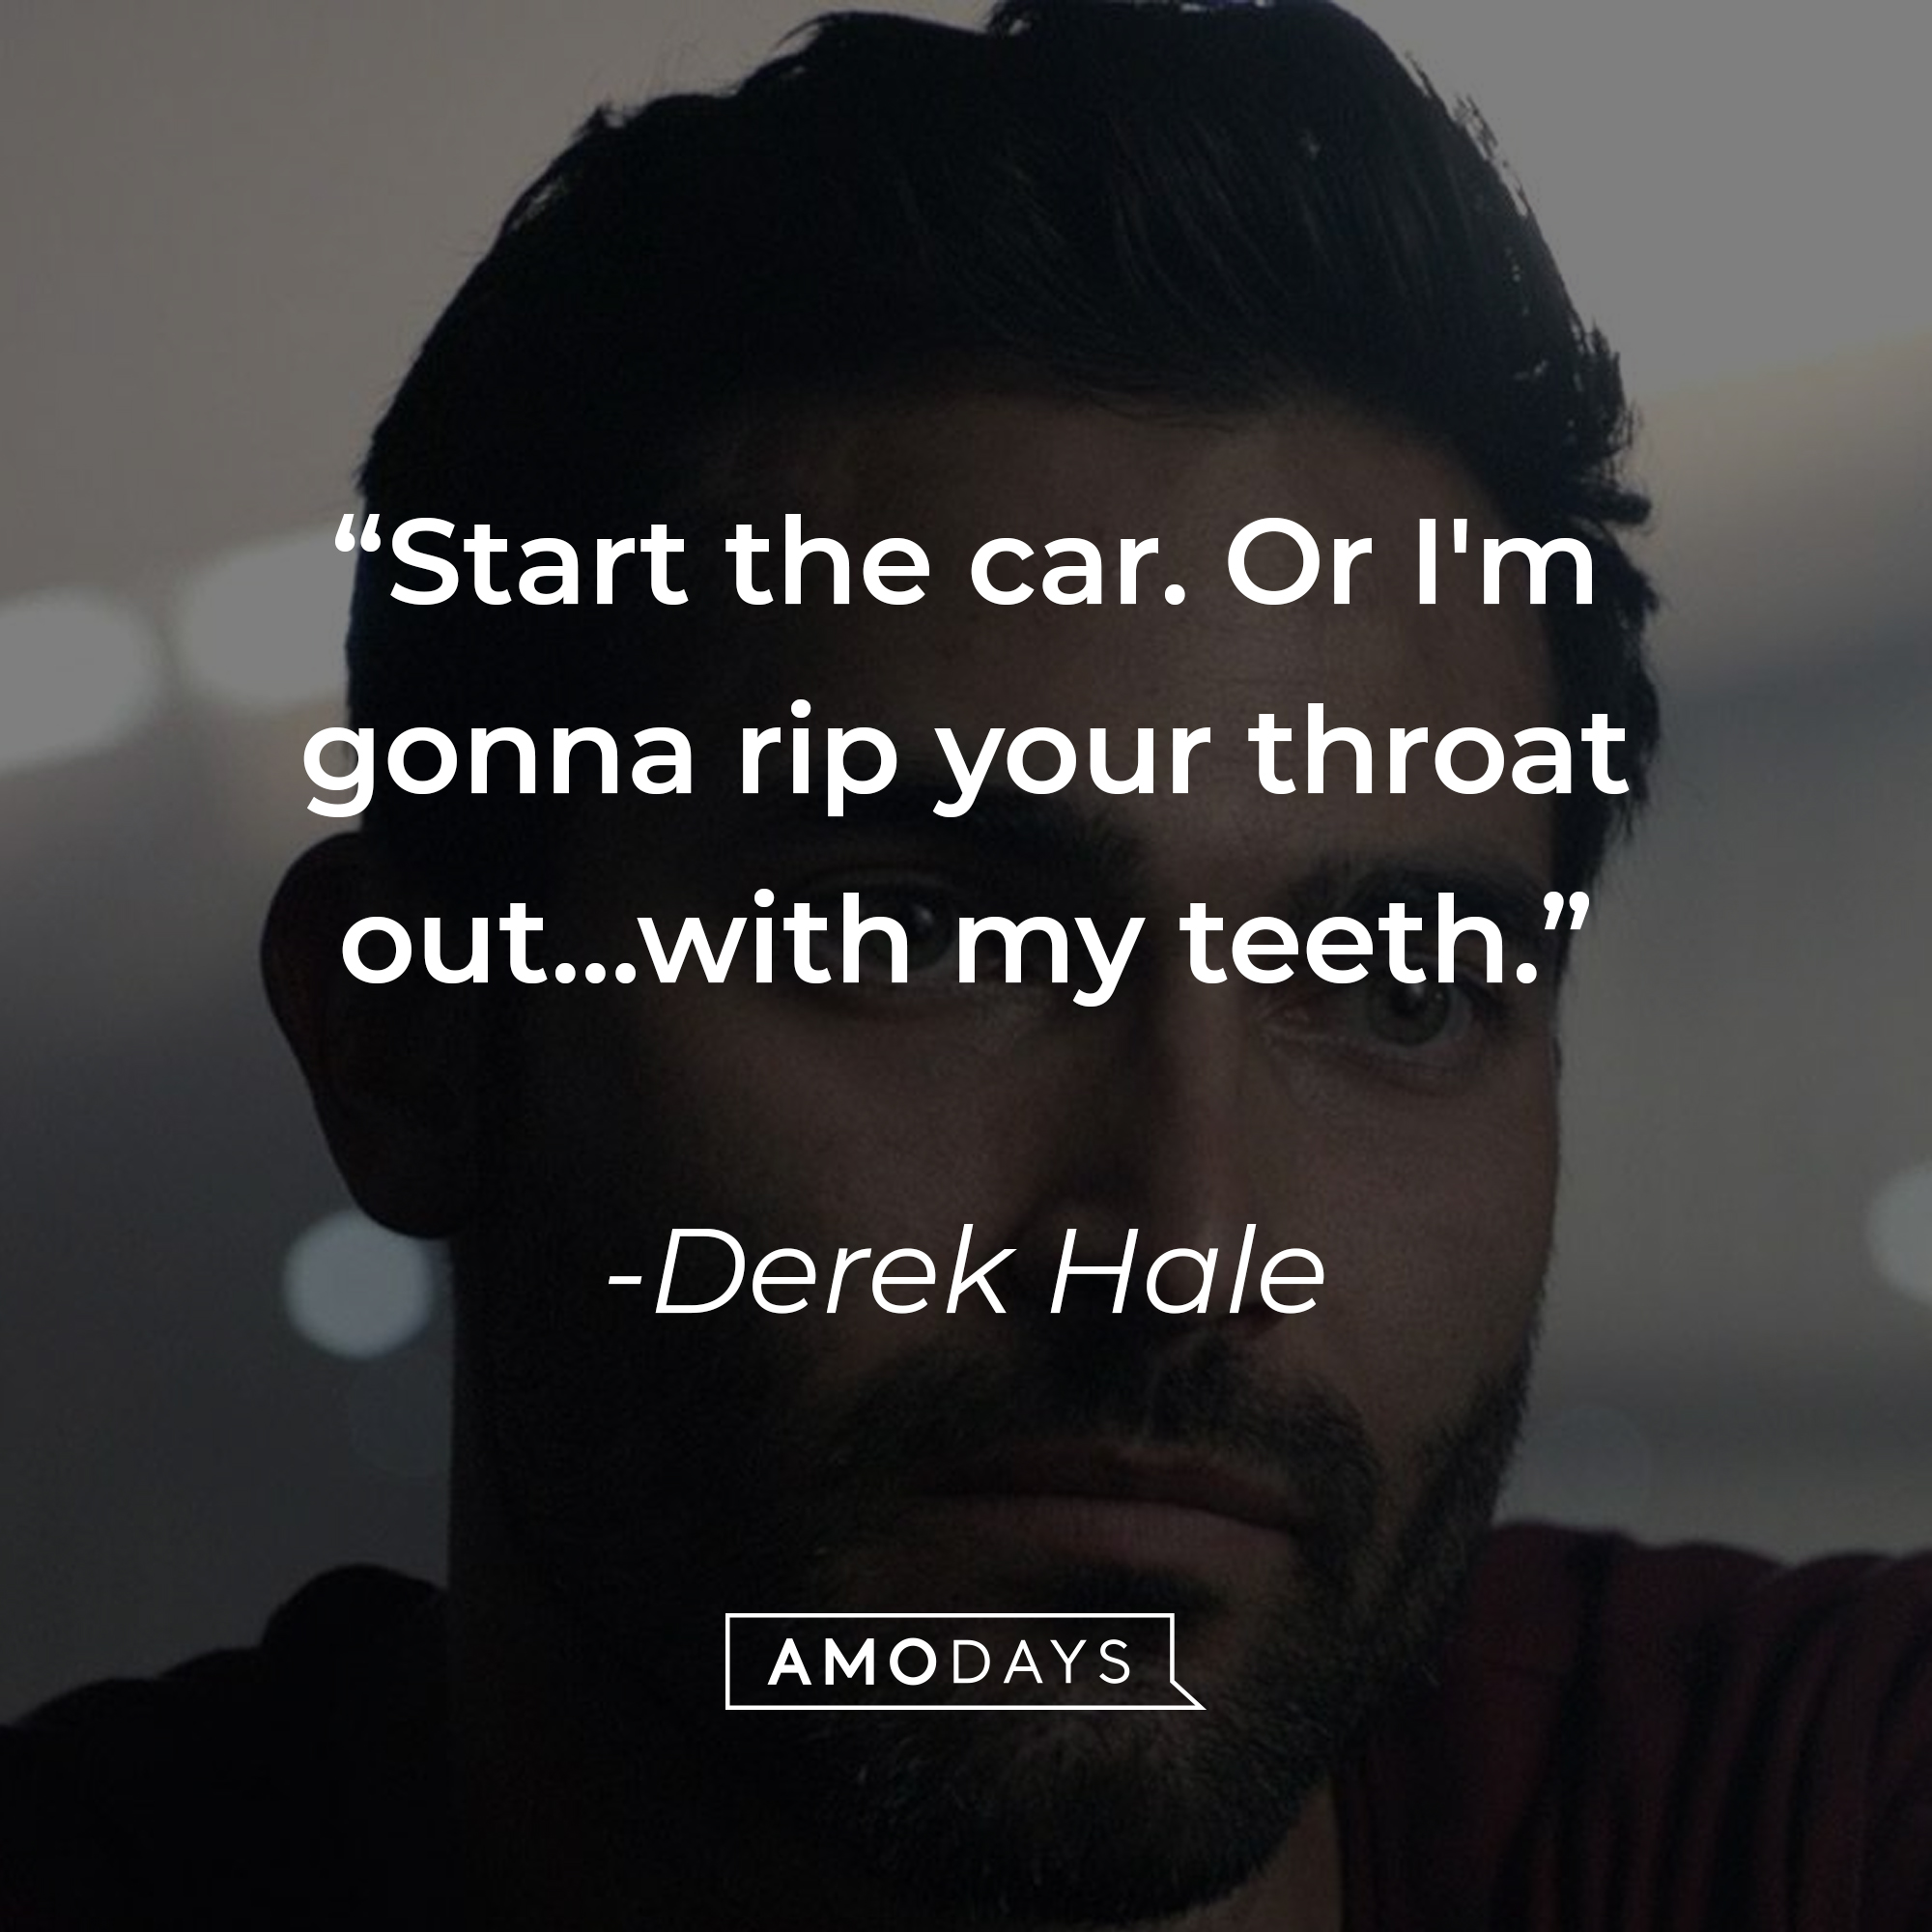 Derek Hale, with his quote: "Start the car. Or I'm gonna rip your throat out…with my teeth." | Source: Amodays